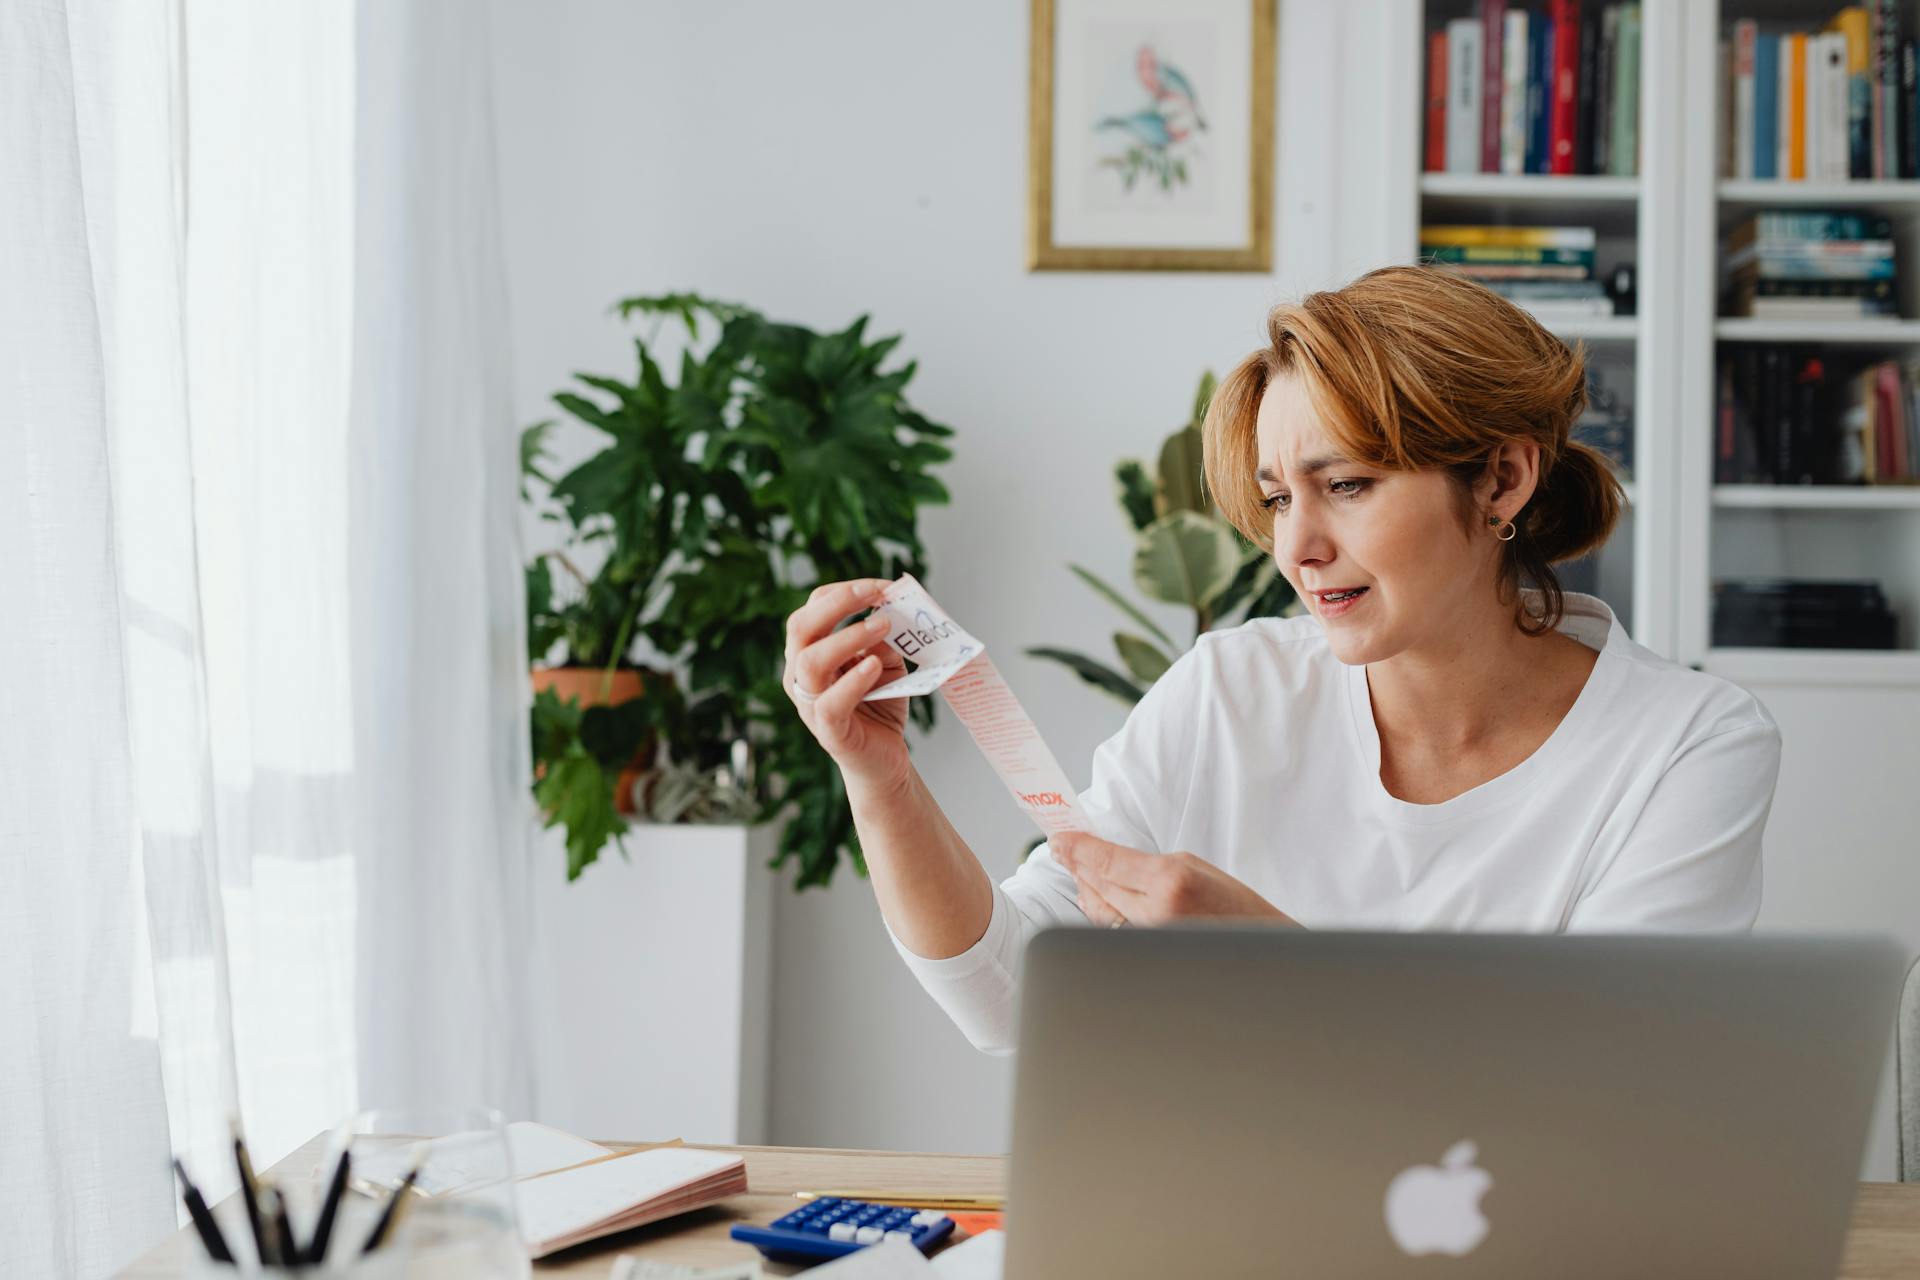 A woman sitting behind a desk looking at a receipt | Source: Pexels